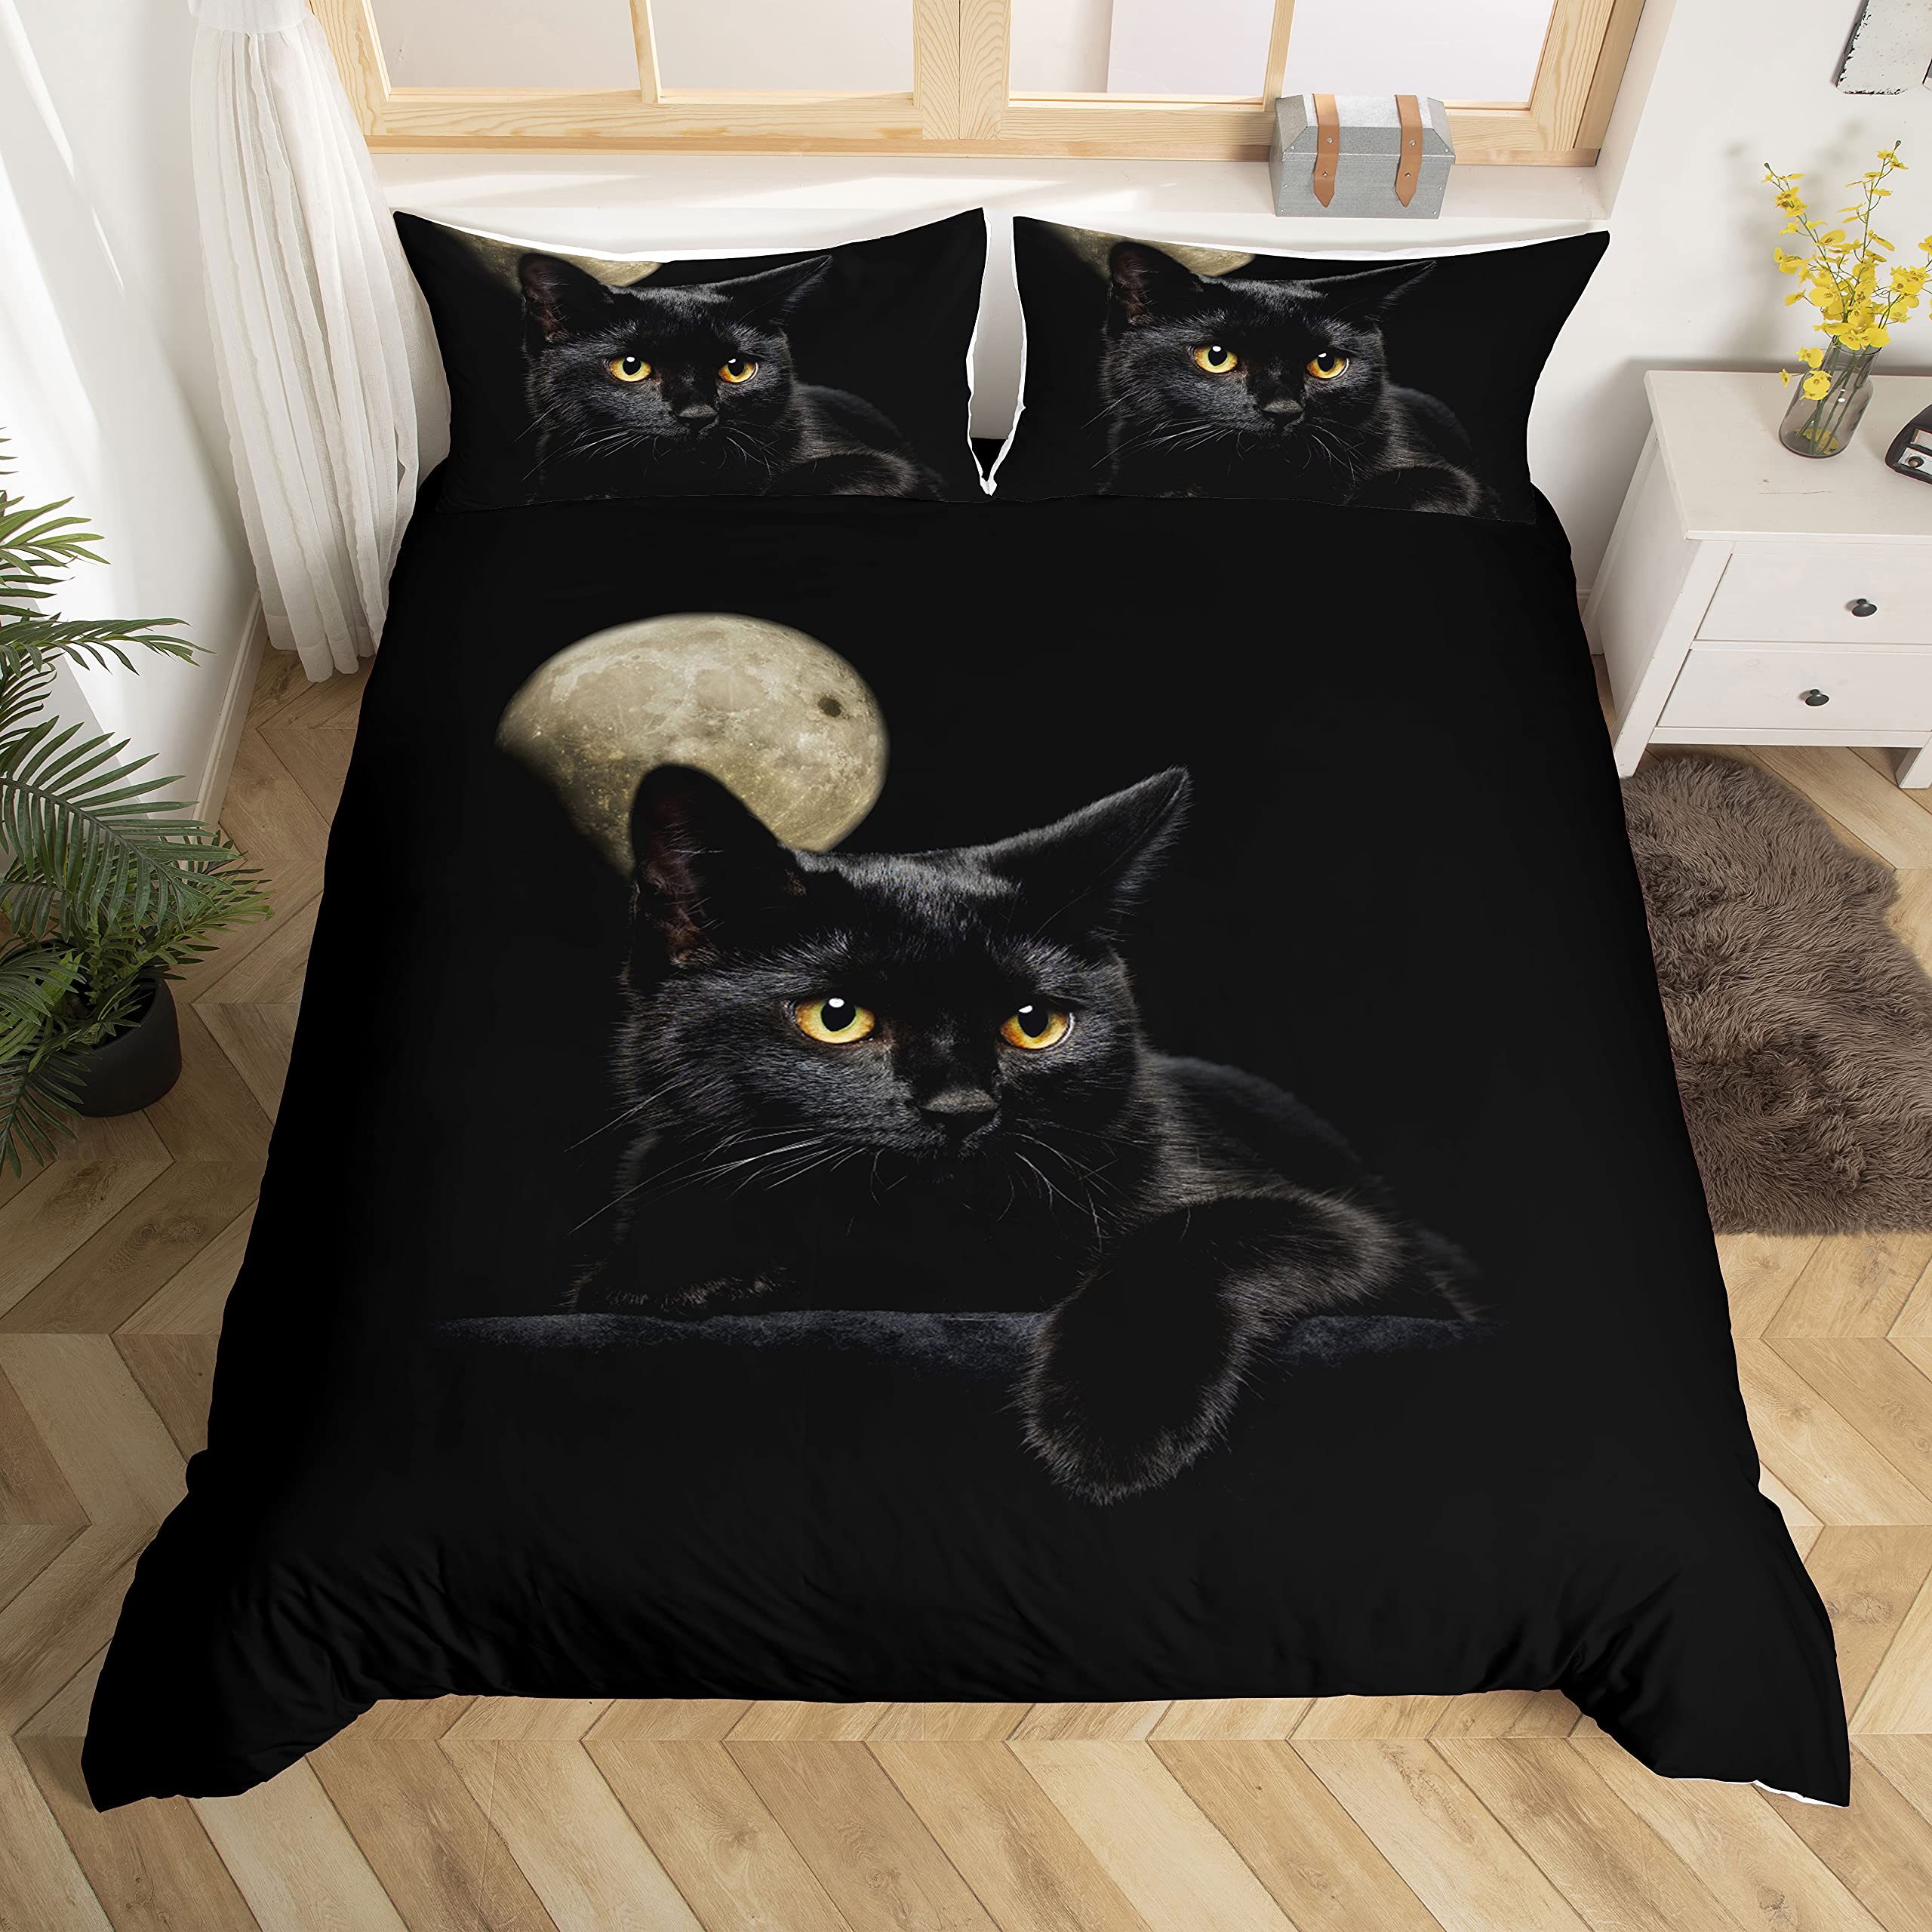 Scared Cats Duvet Covers for Sale